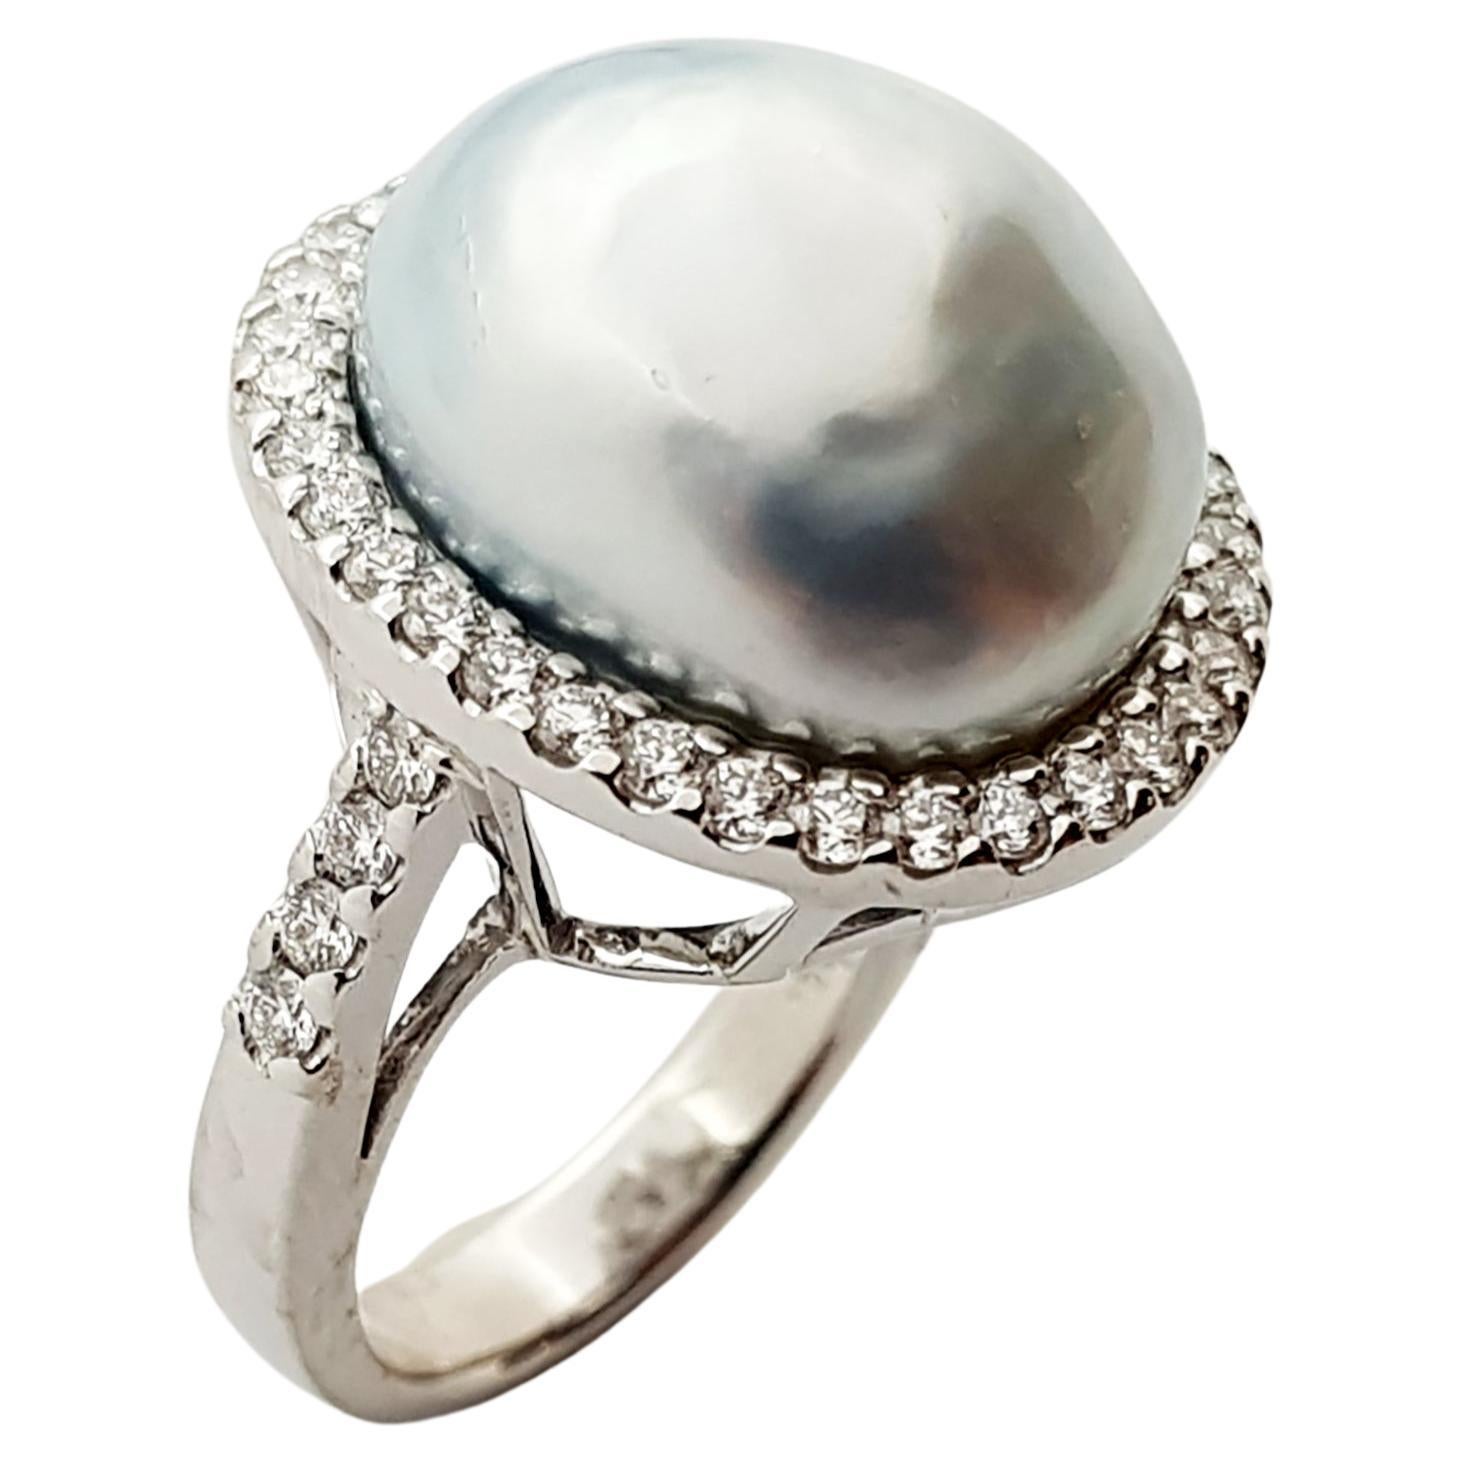 South Sea Pearl with Diamond Ring Set in 18 Karat White Gold Settings